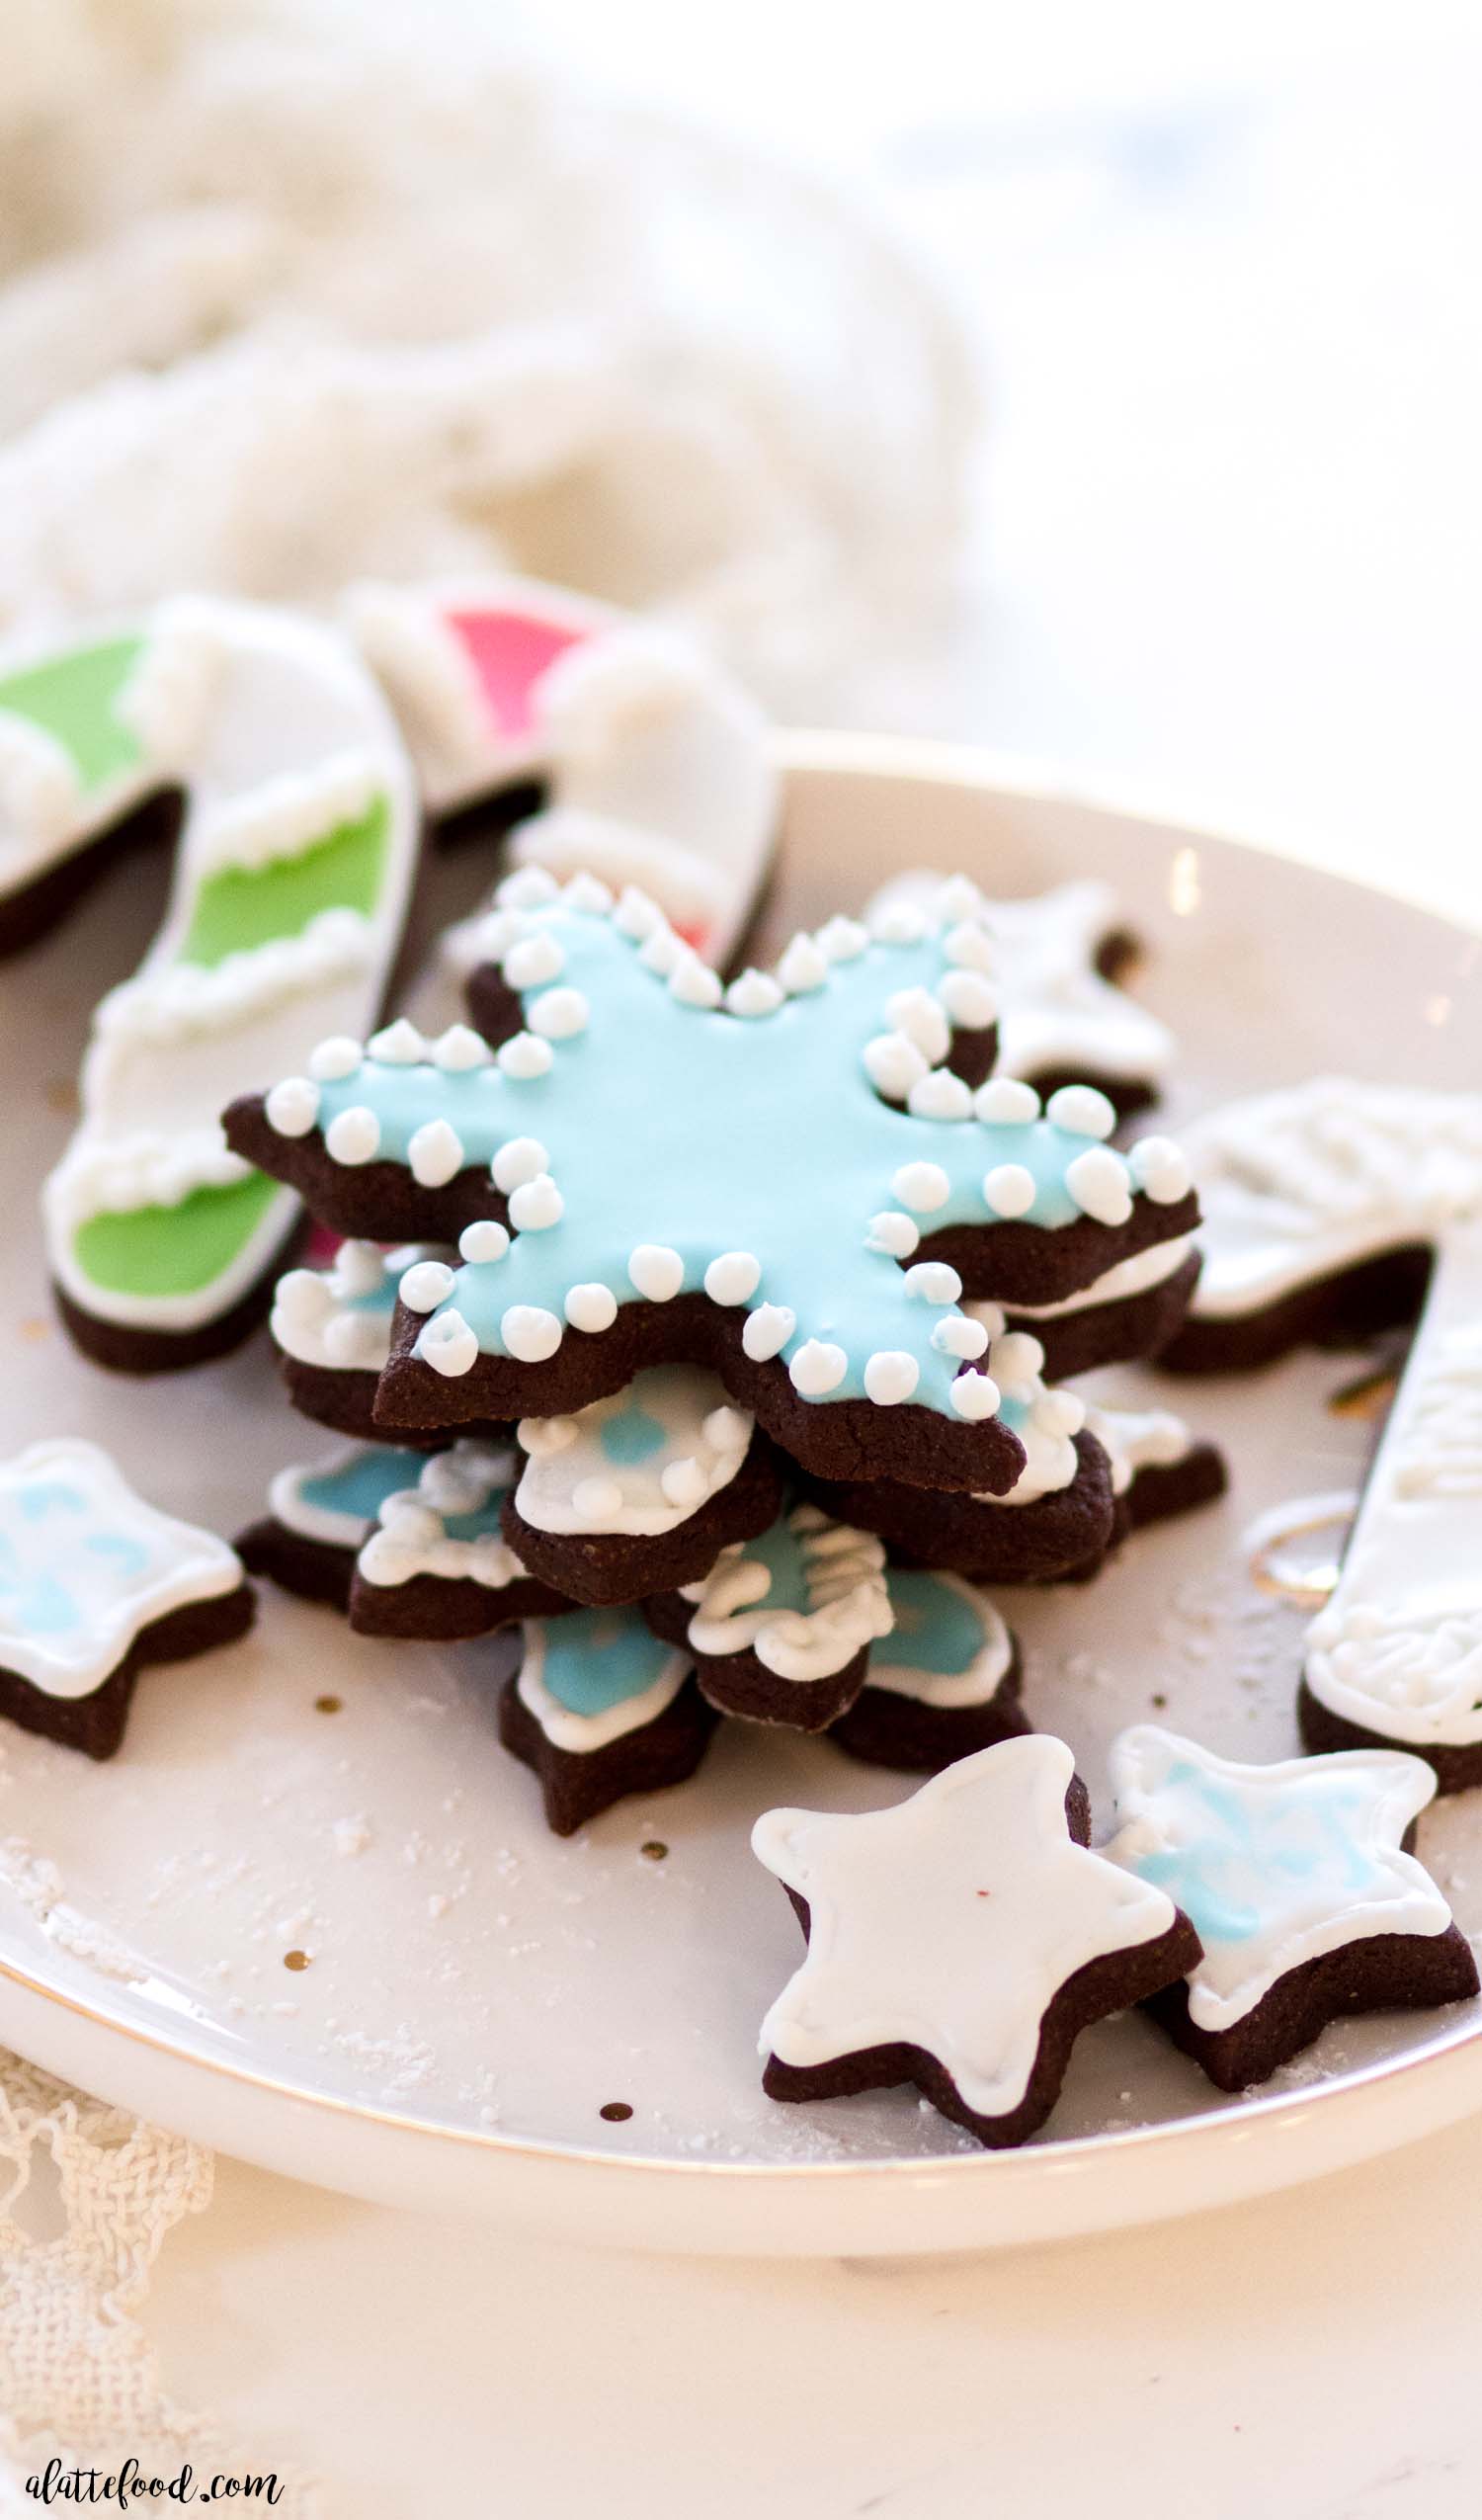 Use Clear Squeeze Bottles for Royal Icing to decorate Cookies